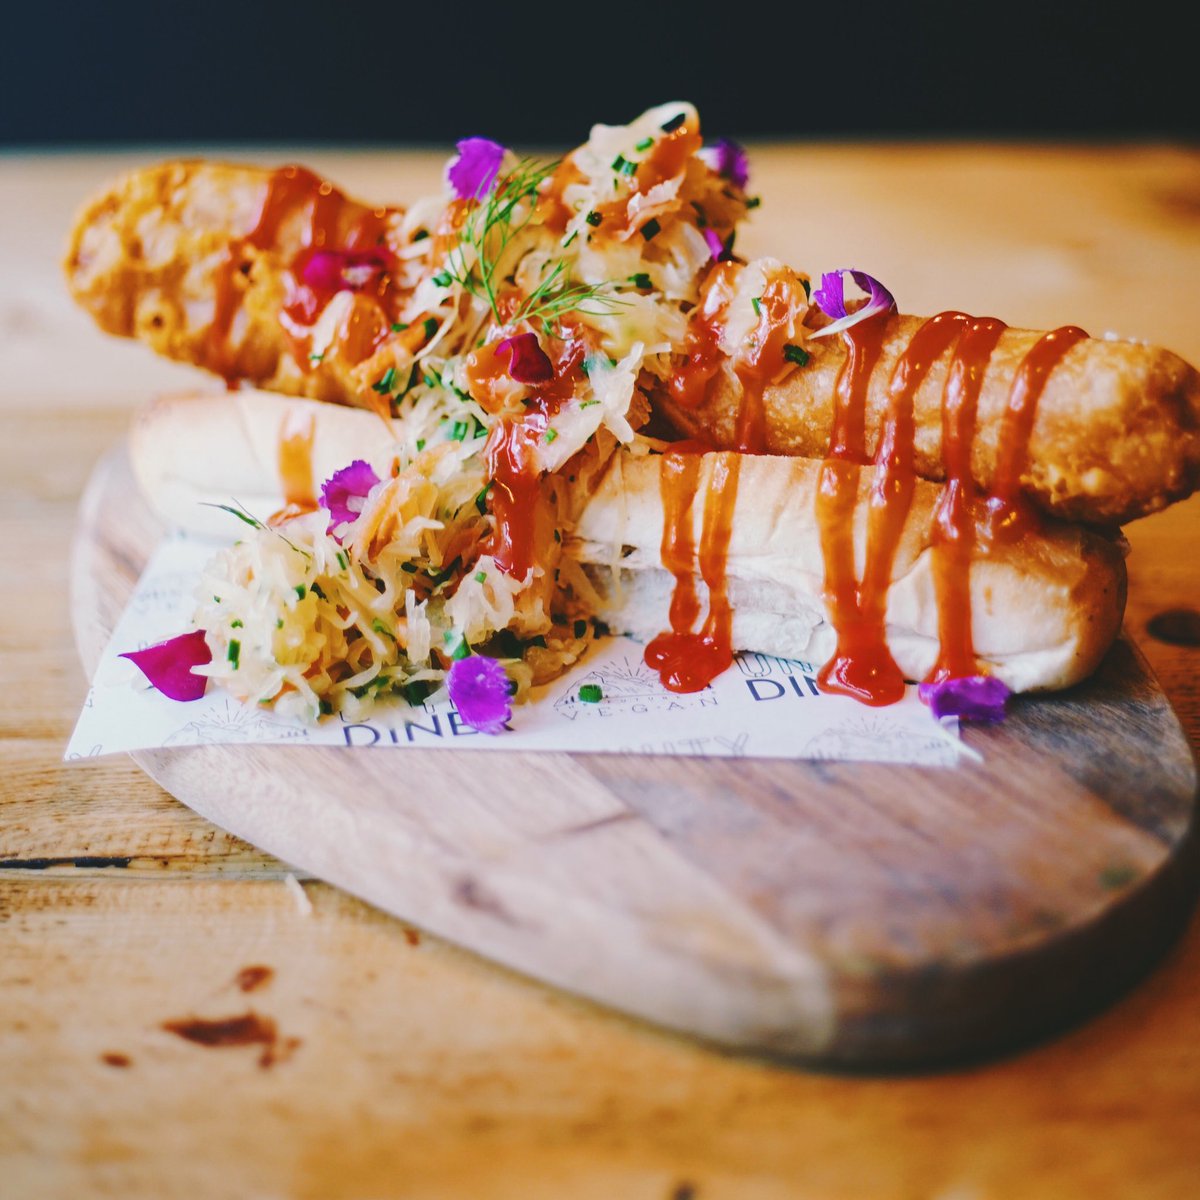 We know you guys like our hot dogs, so we deep fried one, and we think you might like it even more 👀 ⁣⁣ ⚡️ The Surge Dog ⚡️⁣⁣ Deep-fried battered moving mountains hot dog, sauerkraut, ketchup and crispy onions 🔥 ⁣⁣